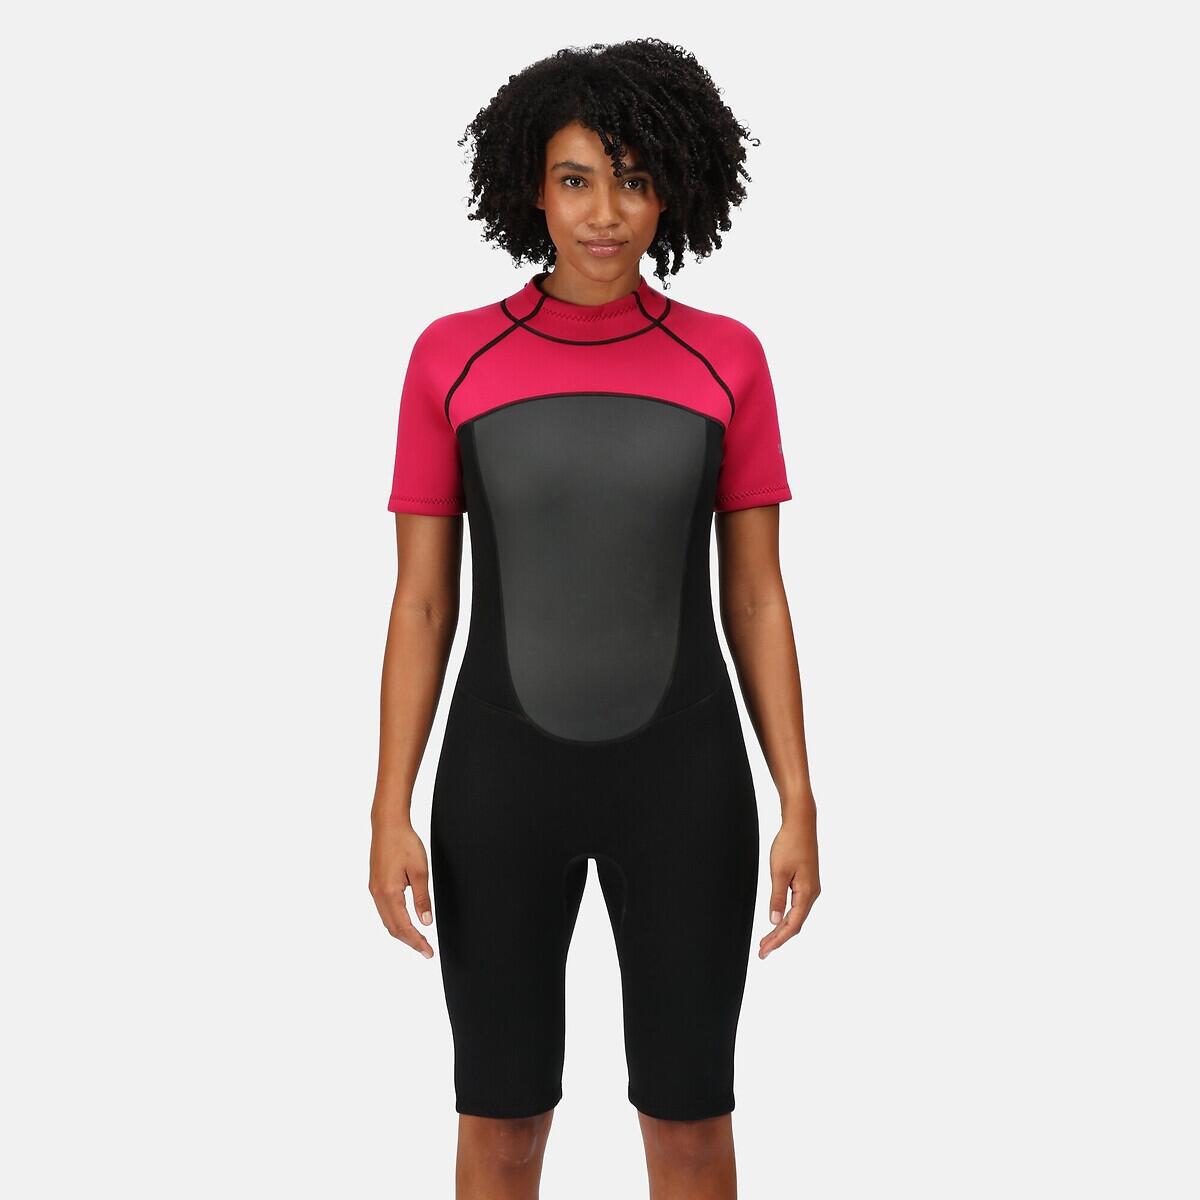 Shorty Wetsuit